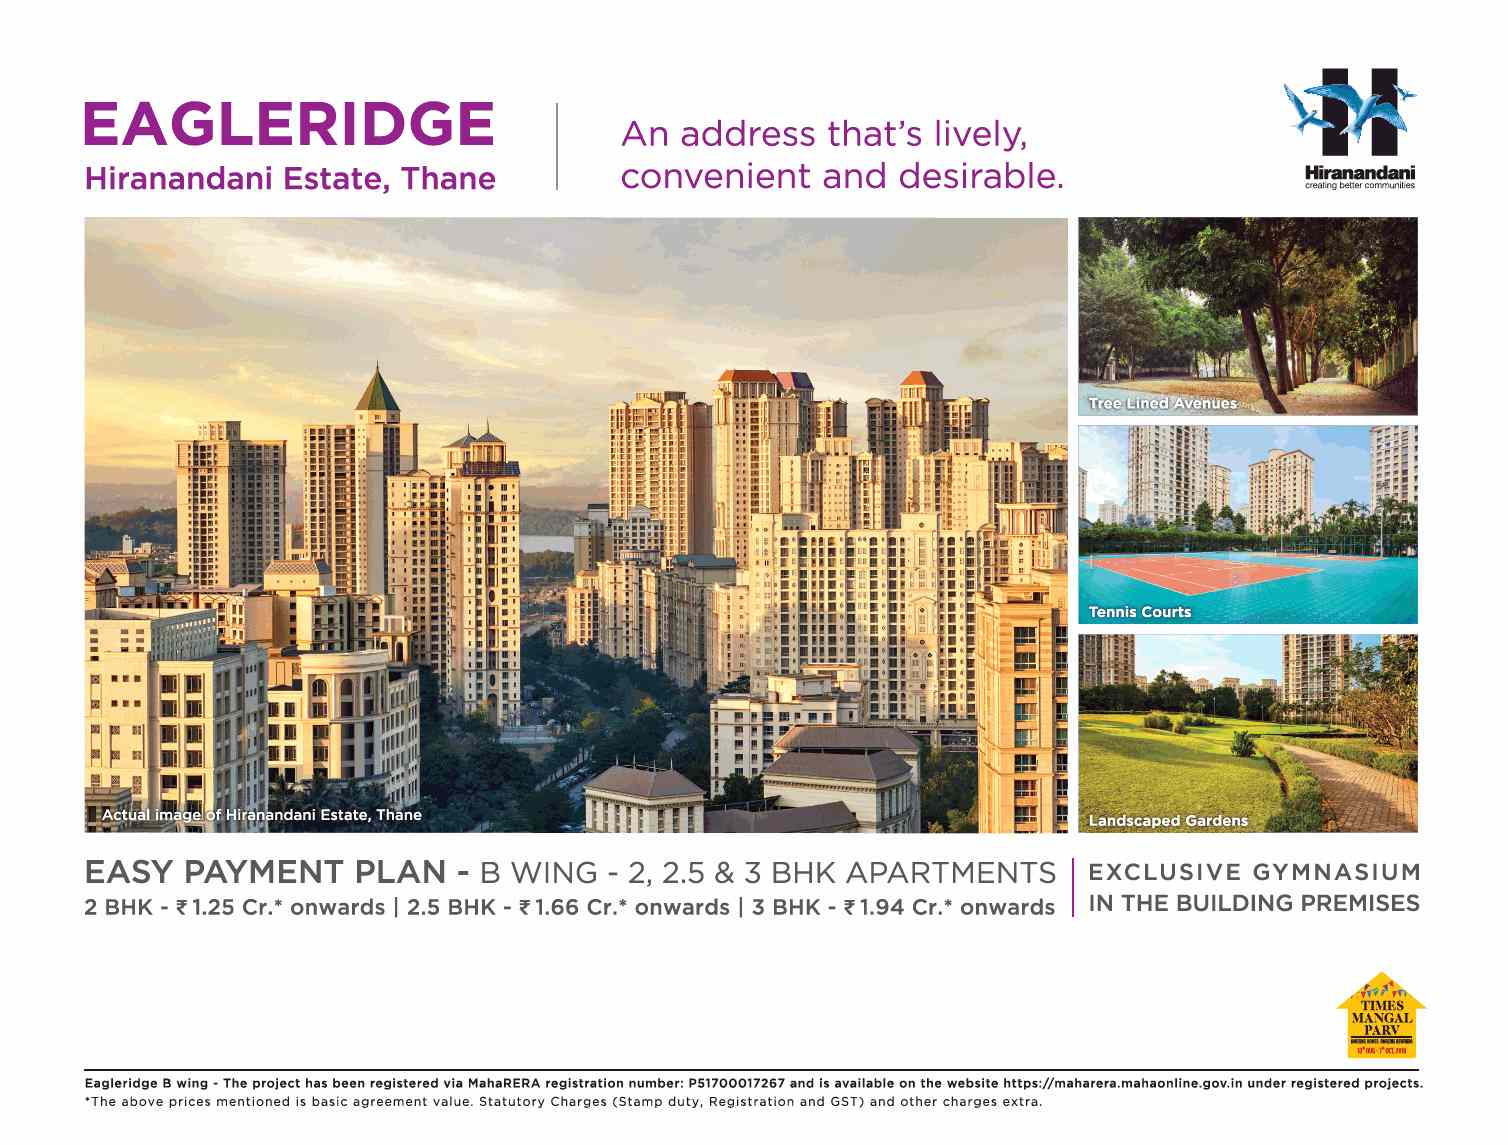 Hiranandani Eagleridge - An address that's lively, convenient and desirable in Mumbai Update